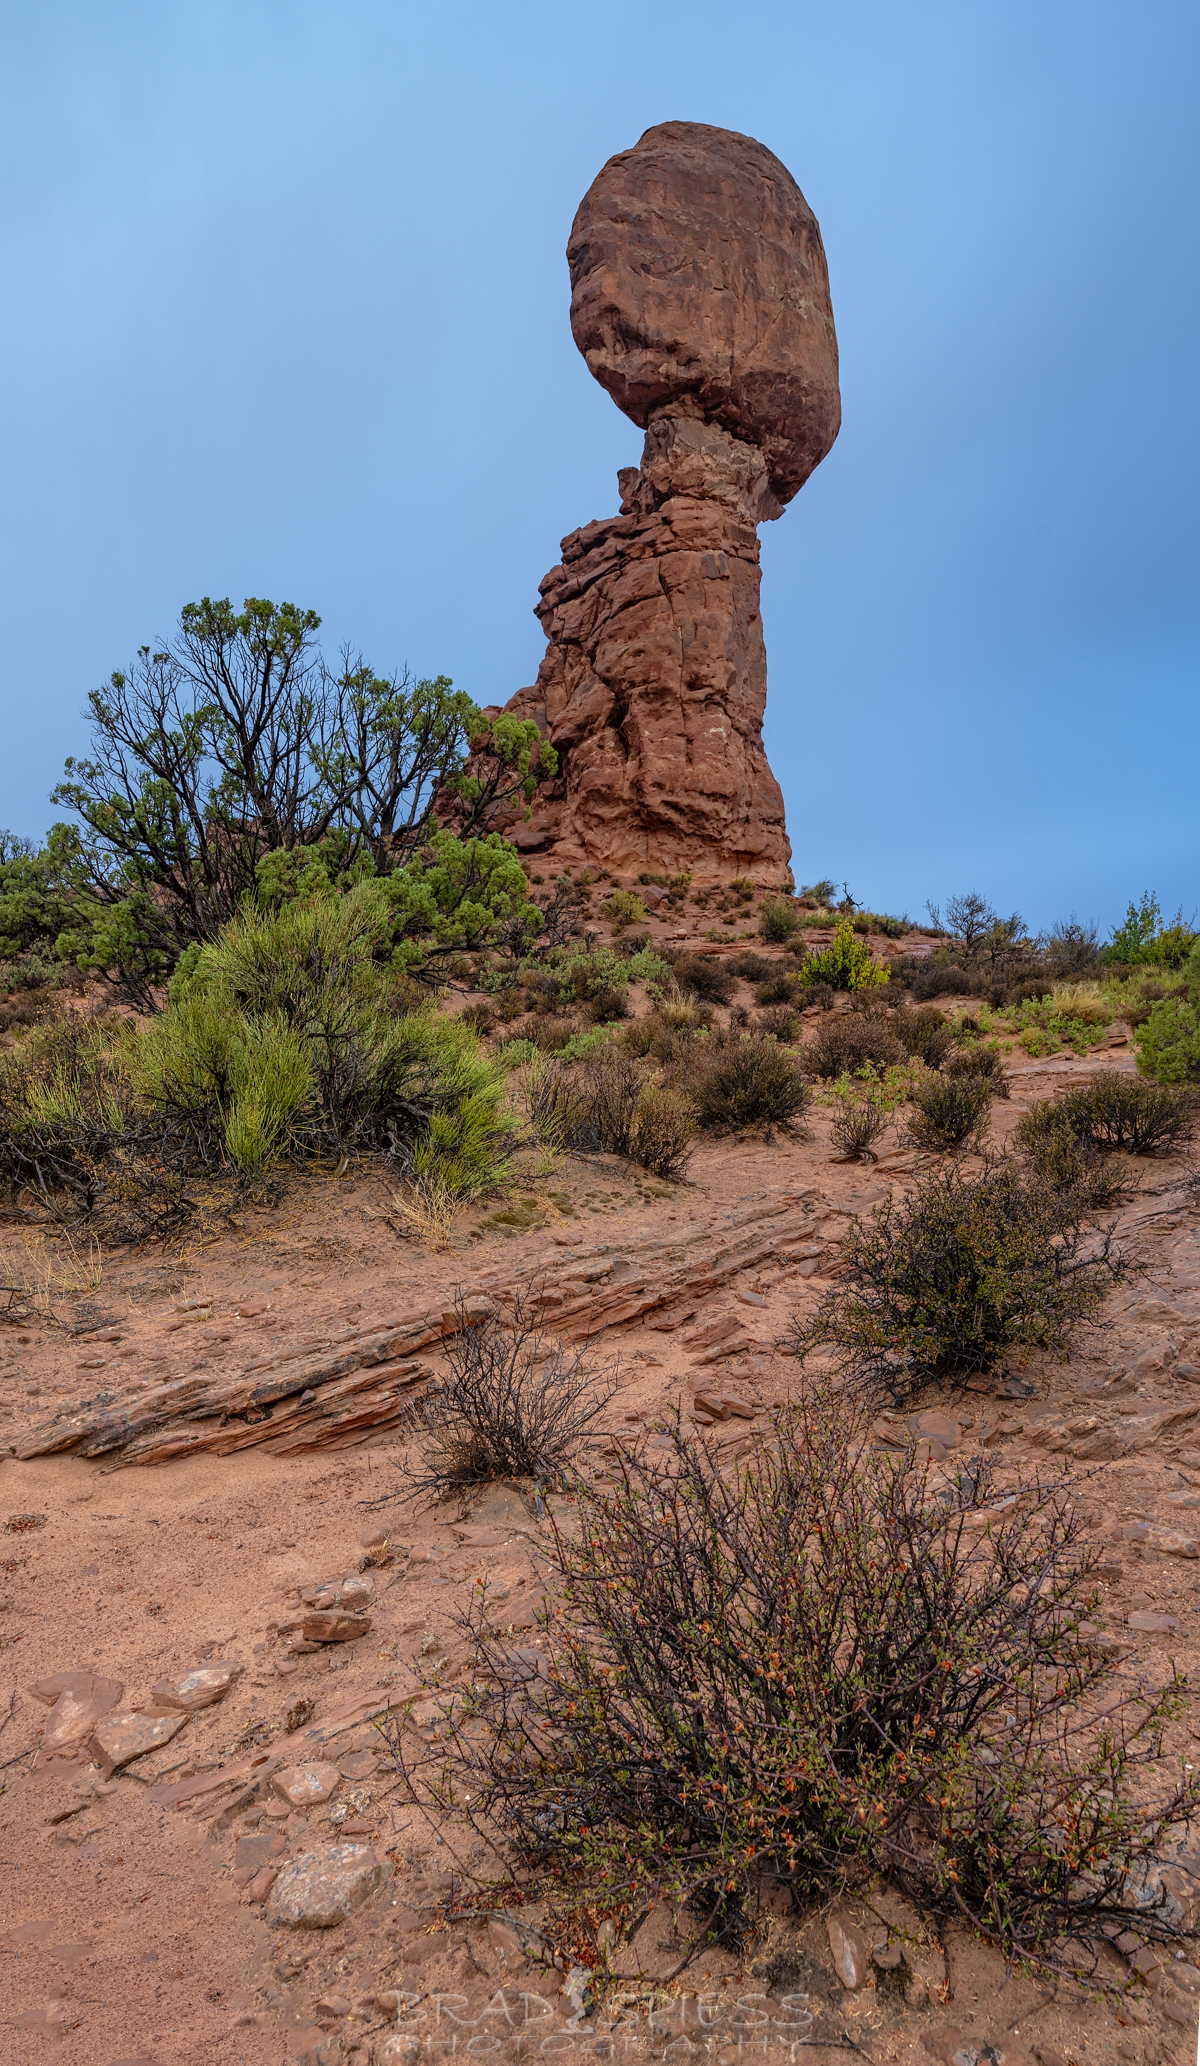 Another Look at Balanced Rock from up close